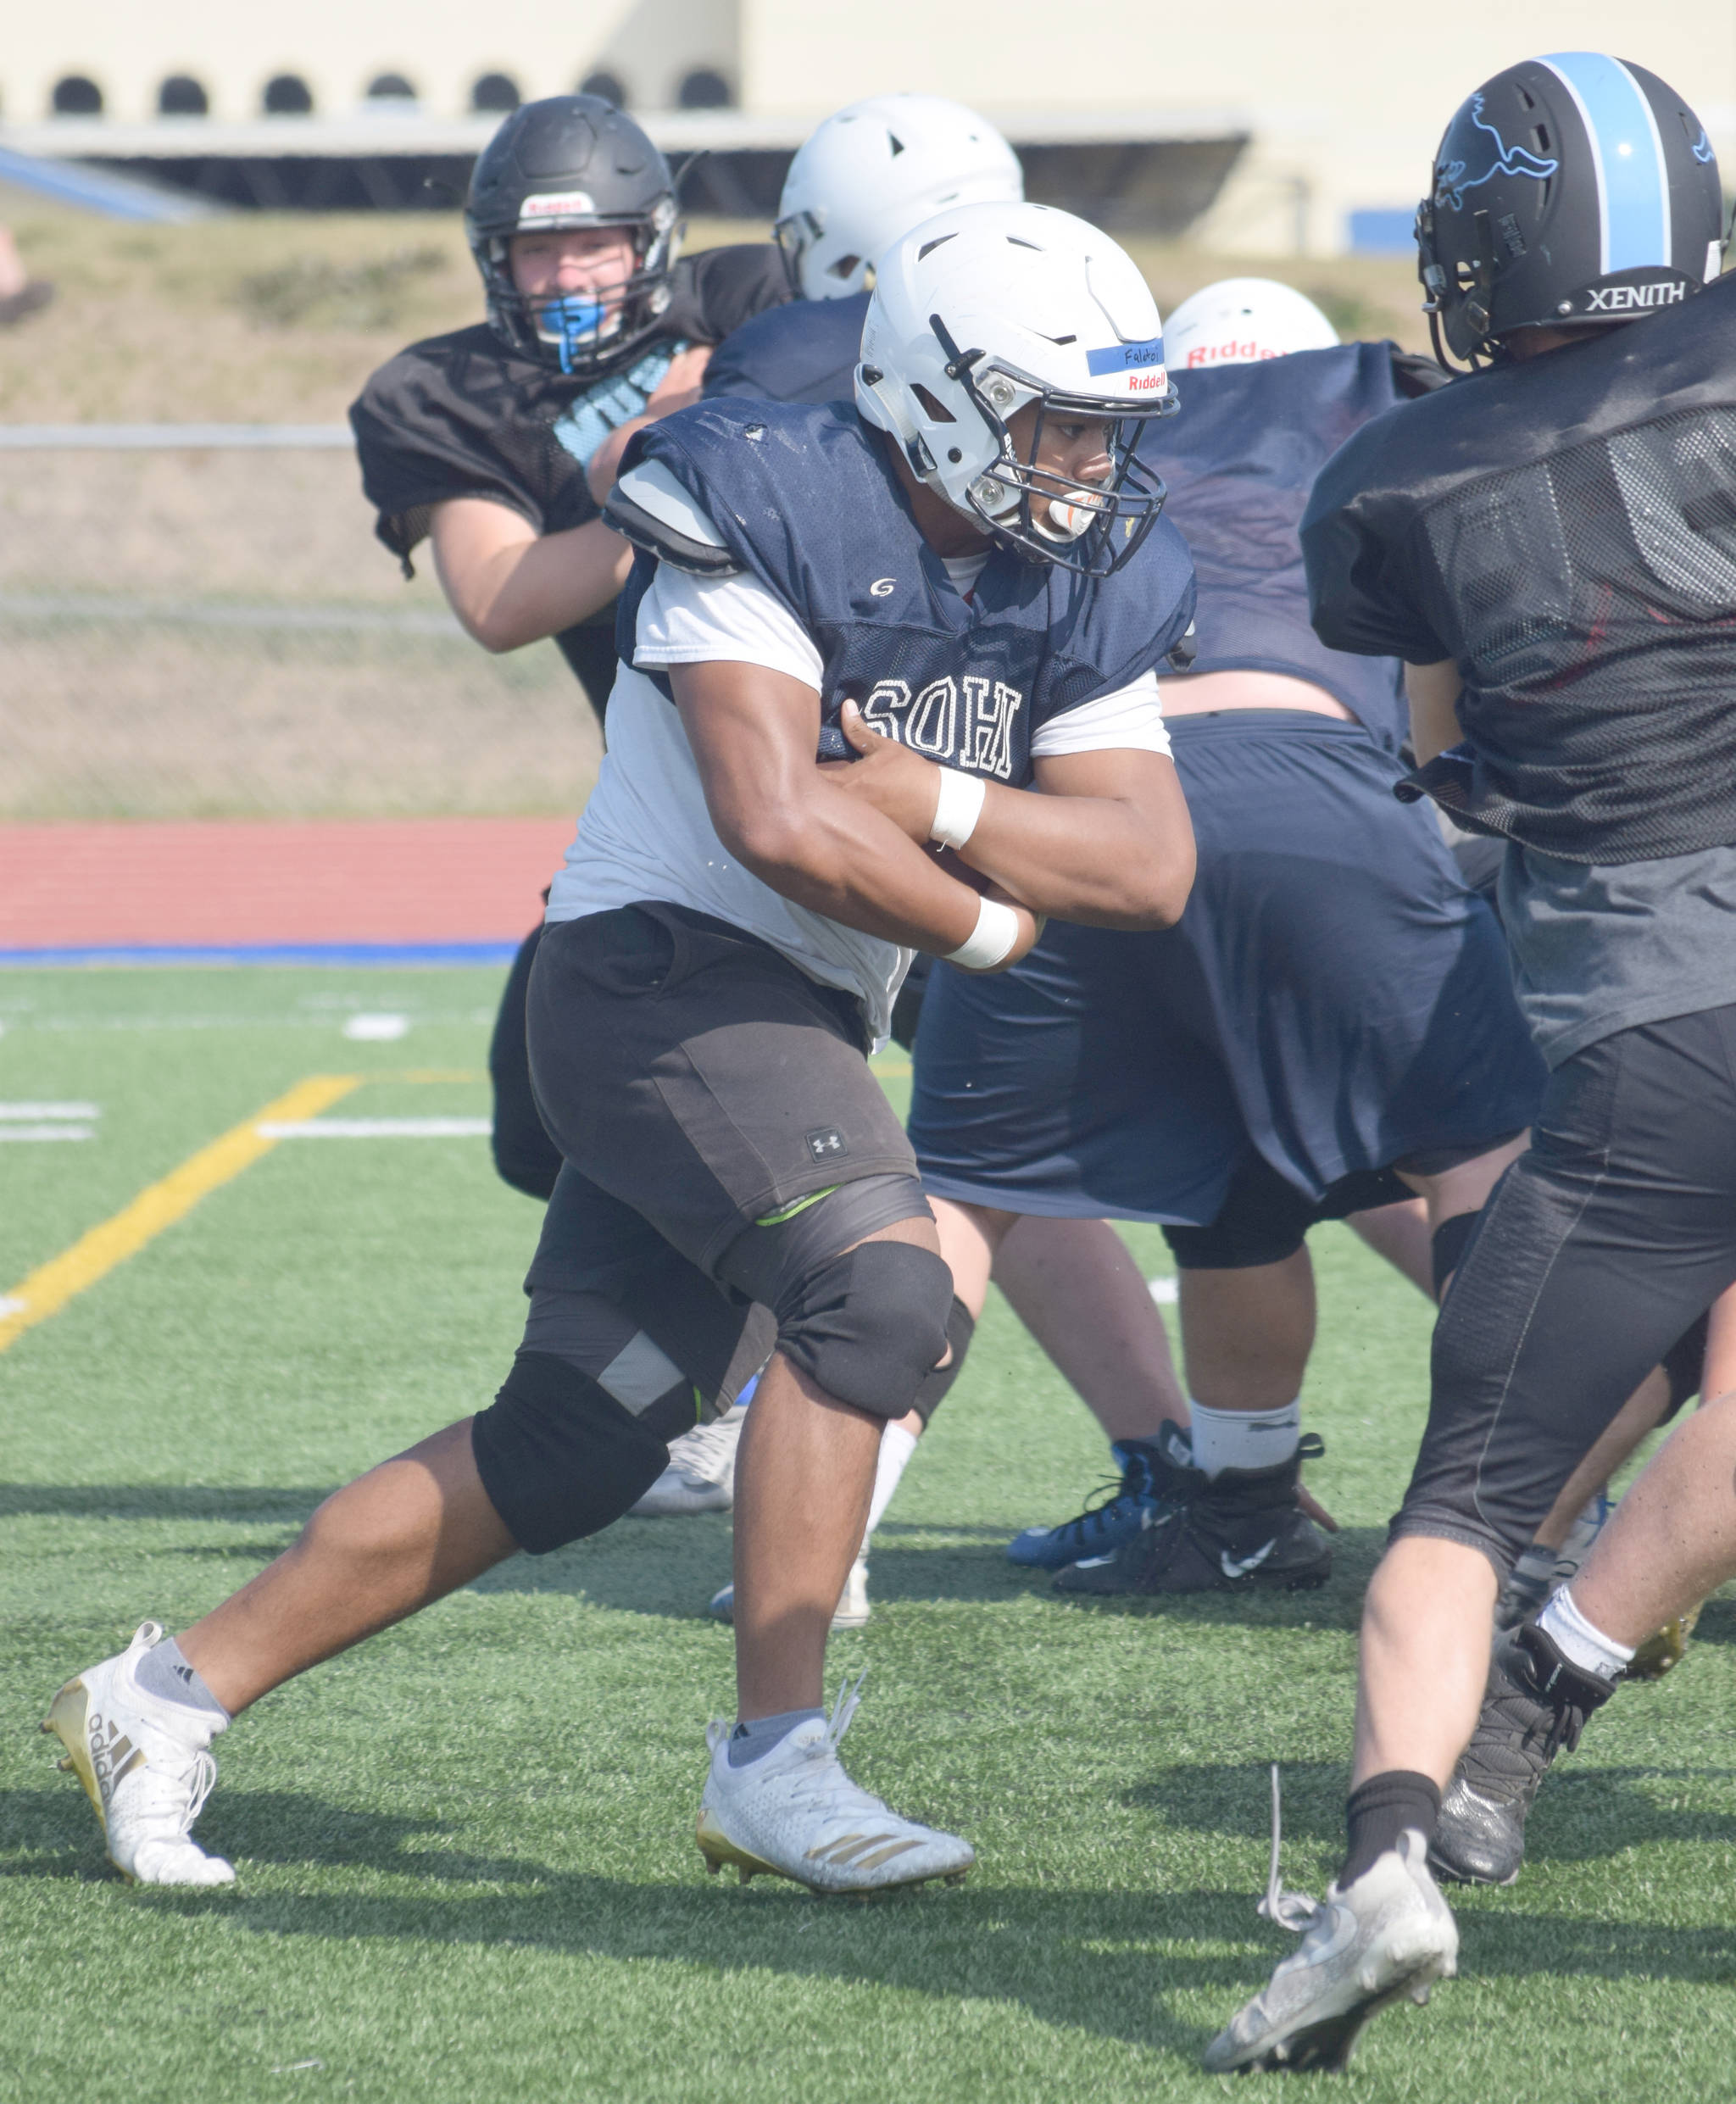 Soldotna’s Aaron Faletoi does a great job concealing the ball as he runs in a scrimmage against Chugiak on Saturday, Aug. 10, 2019, at Justin Maile Field in Soldotna, Alaska. (Photo by Jeff Helminiak/Peninsula Clarion)